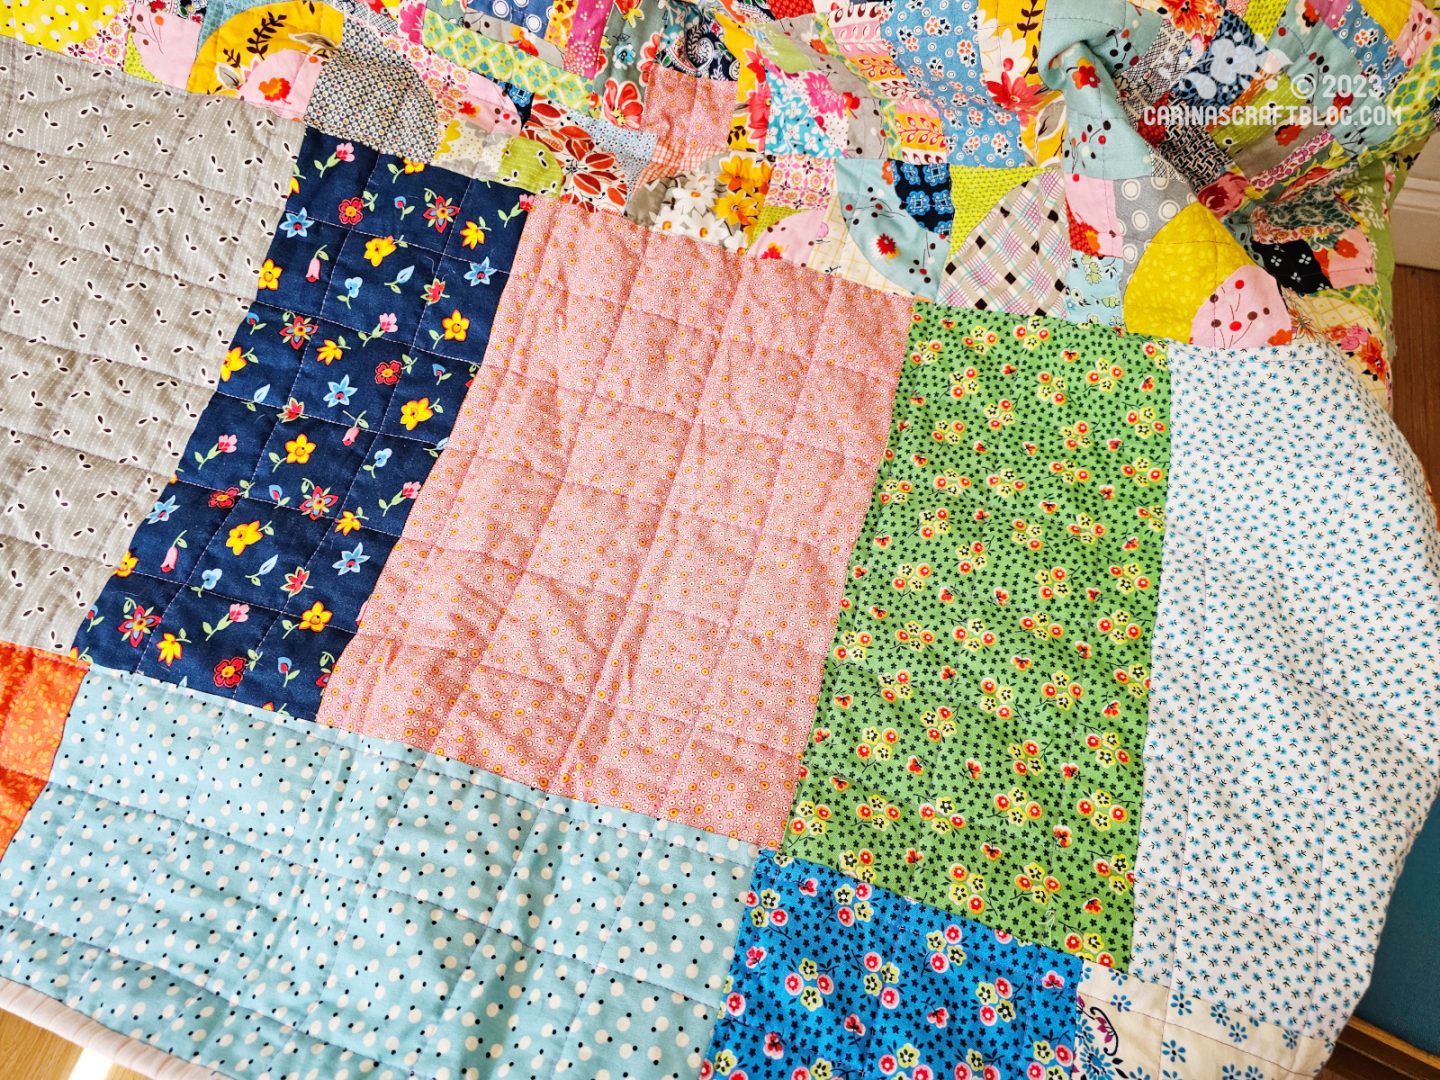 Near view of the back of a quilt, showing a section of large rectangular pieces of fabric in different prints and colours.